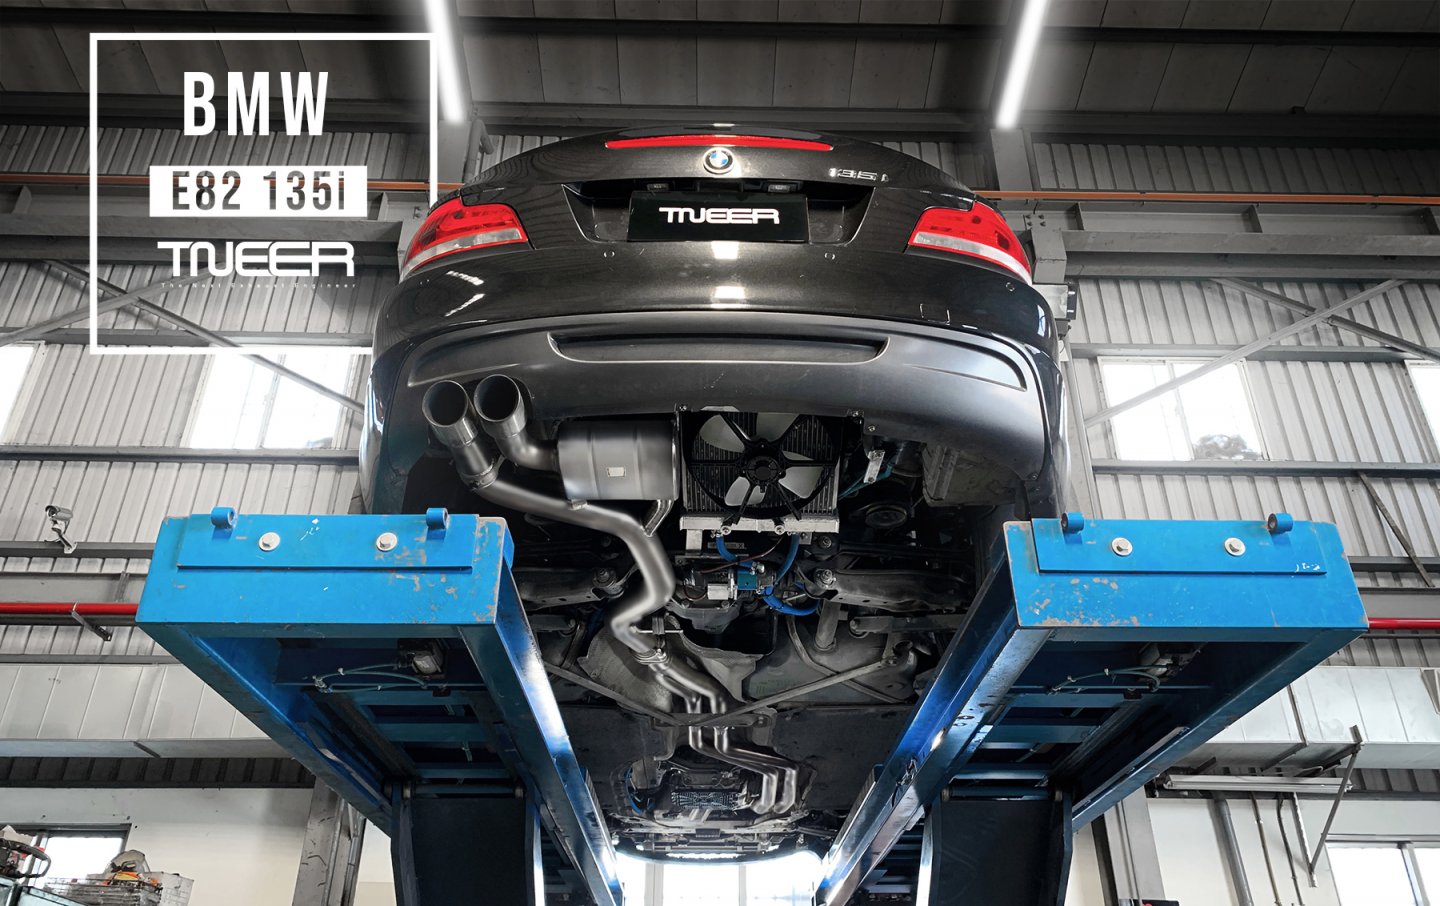 BMW E82 (M135i) TNEER Exhaust System